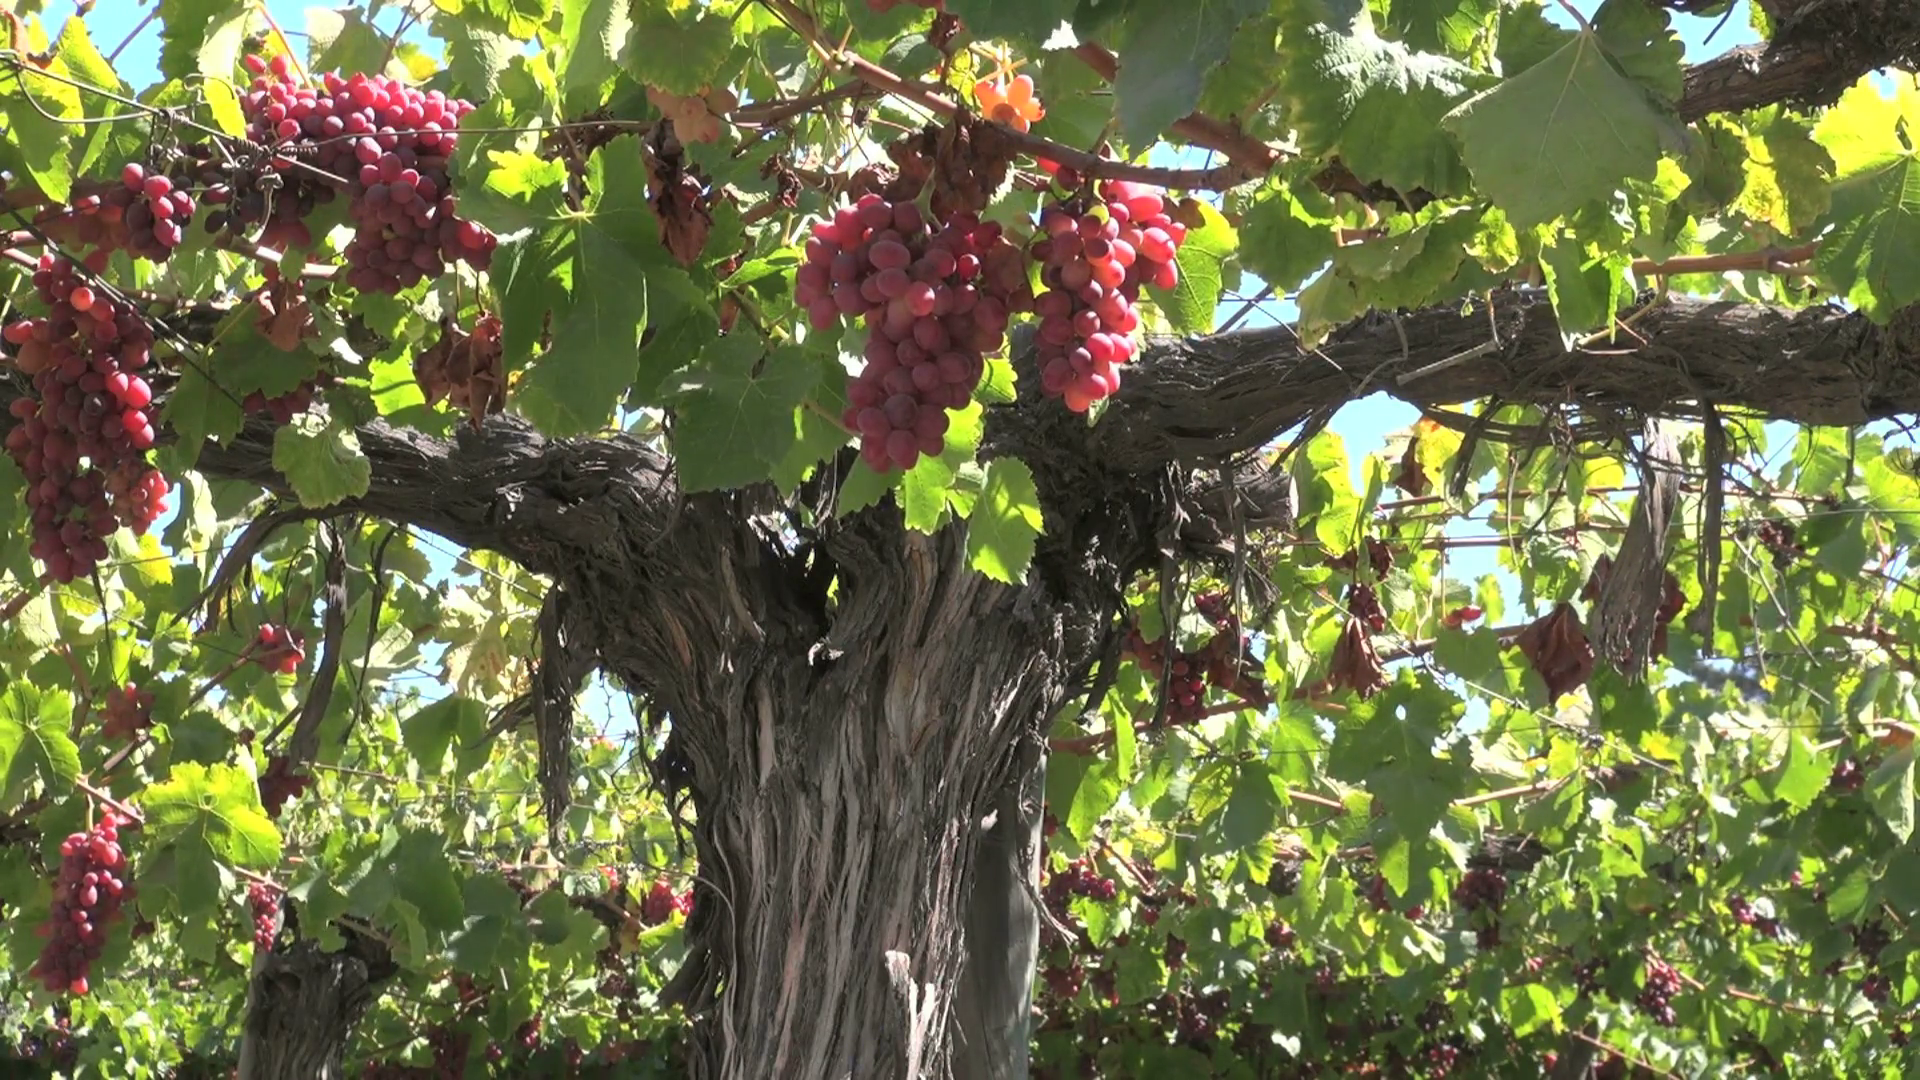 Grapes Hanging from a Tree Stock Video Footage - VideoBlocks